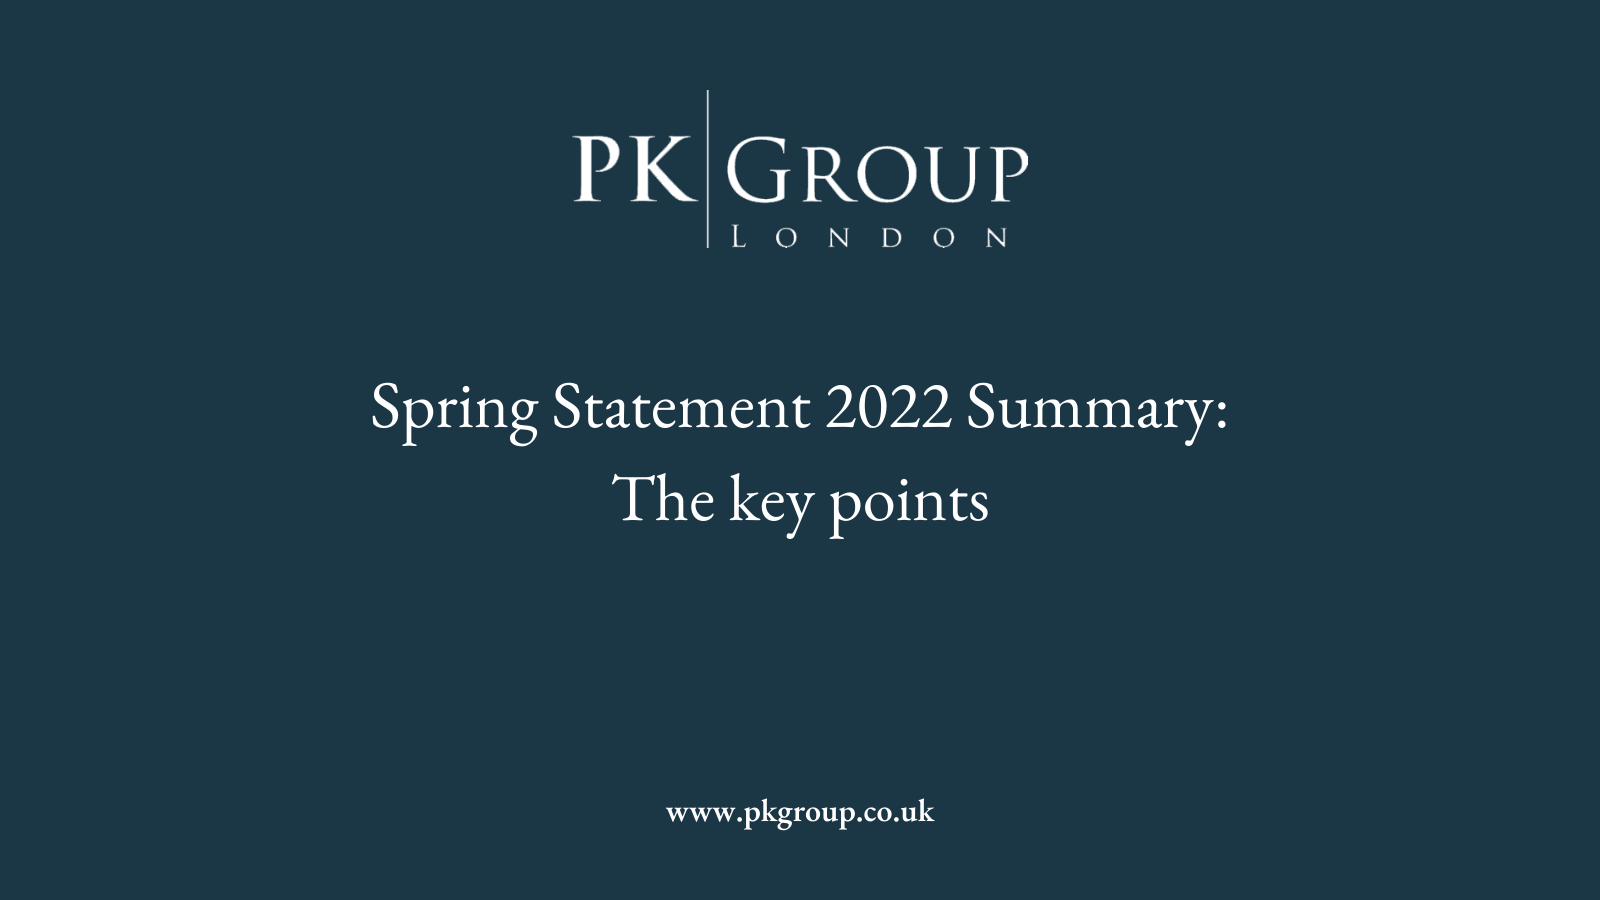 Spring Statement 2022 Summary: The key points